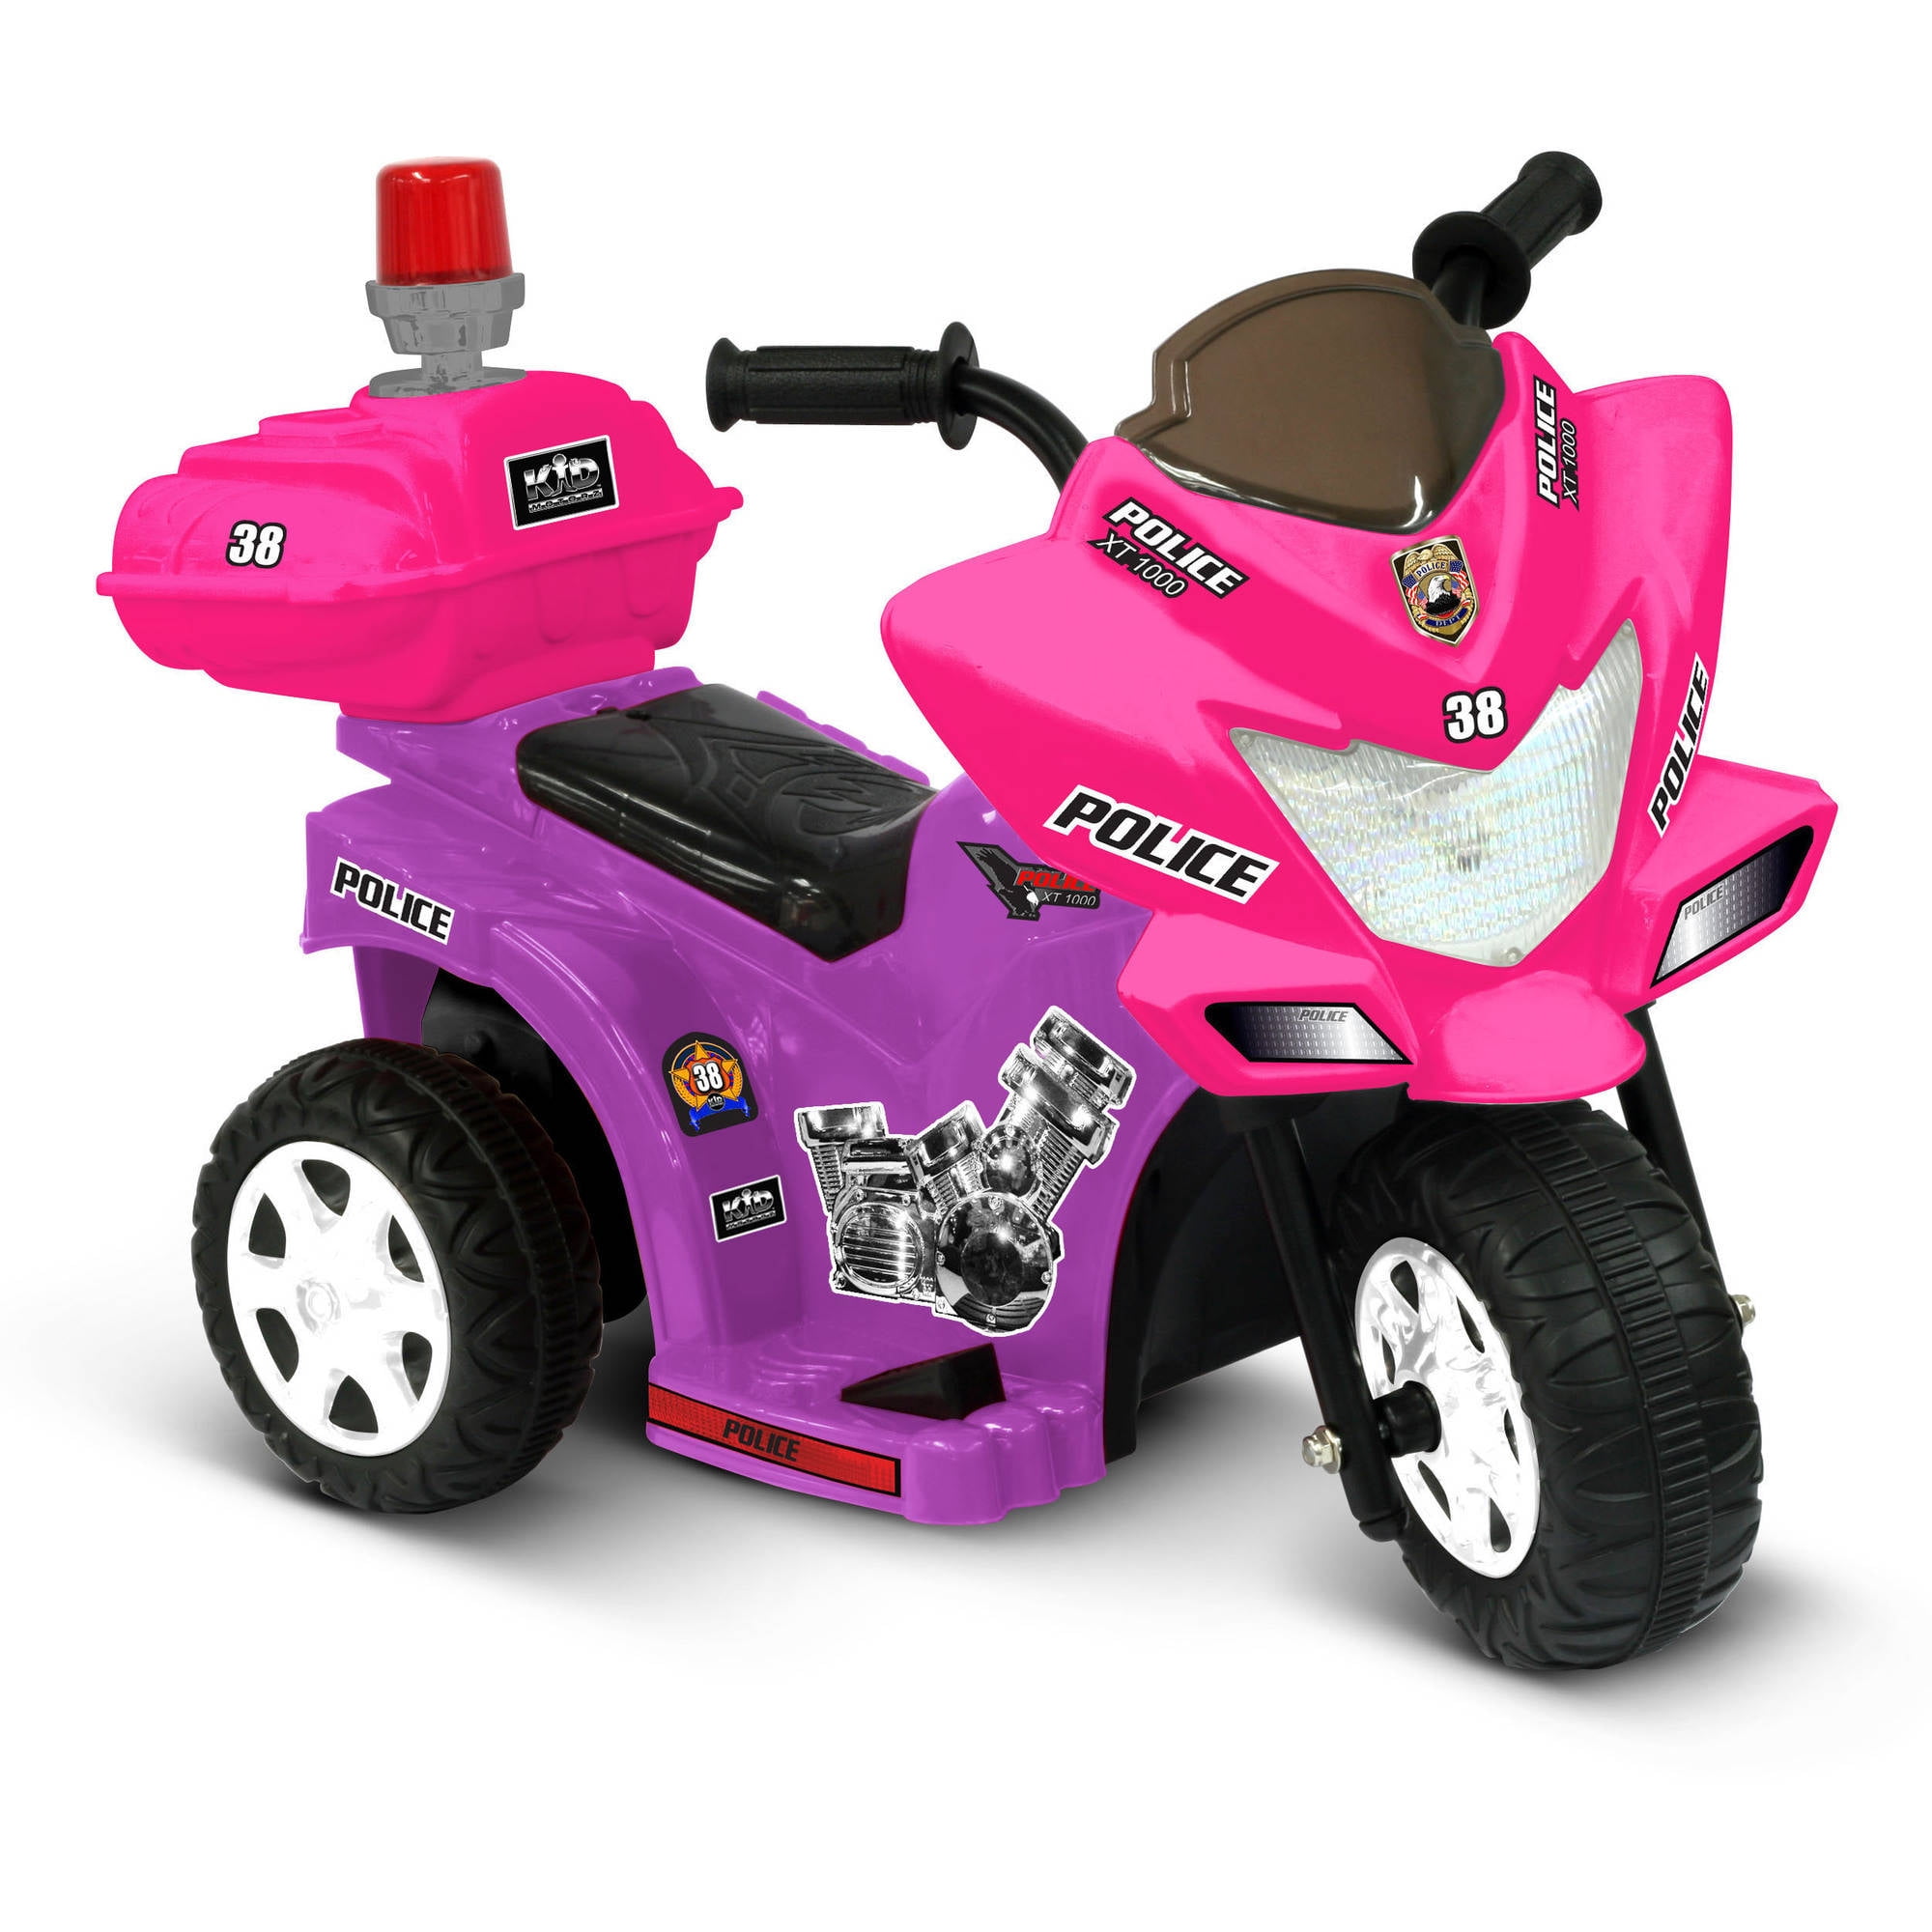 Electric Cars For Kids To Ride On Toys Police Riding Motorcycle Trike 6V Girls 